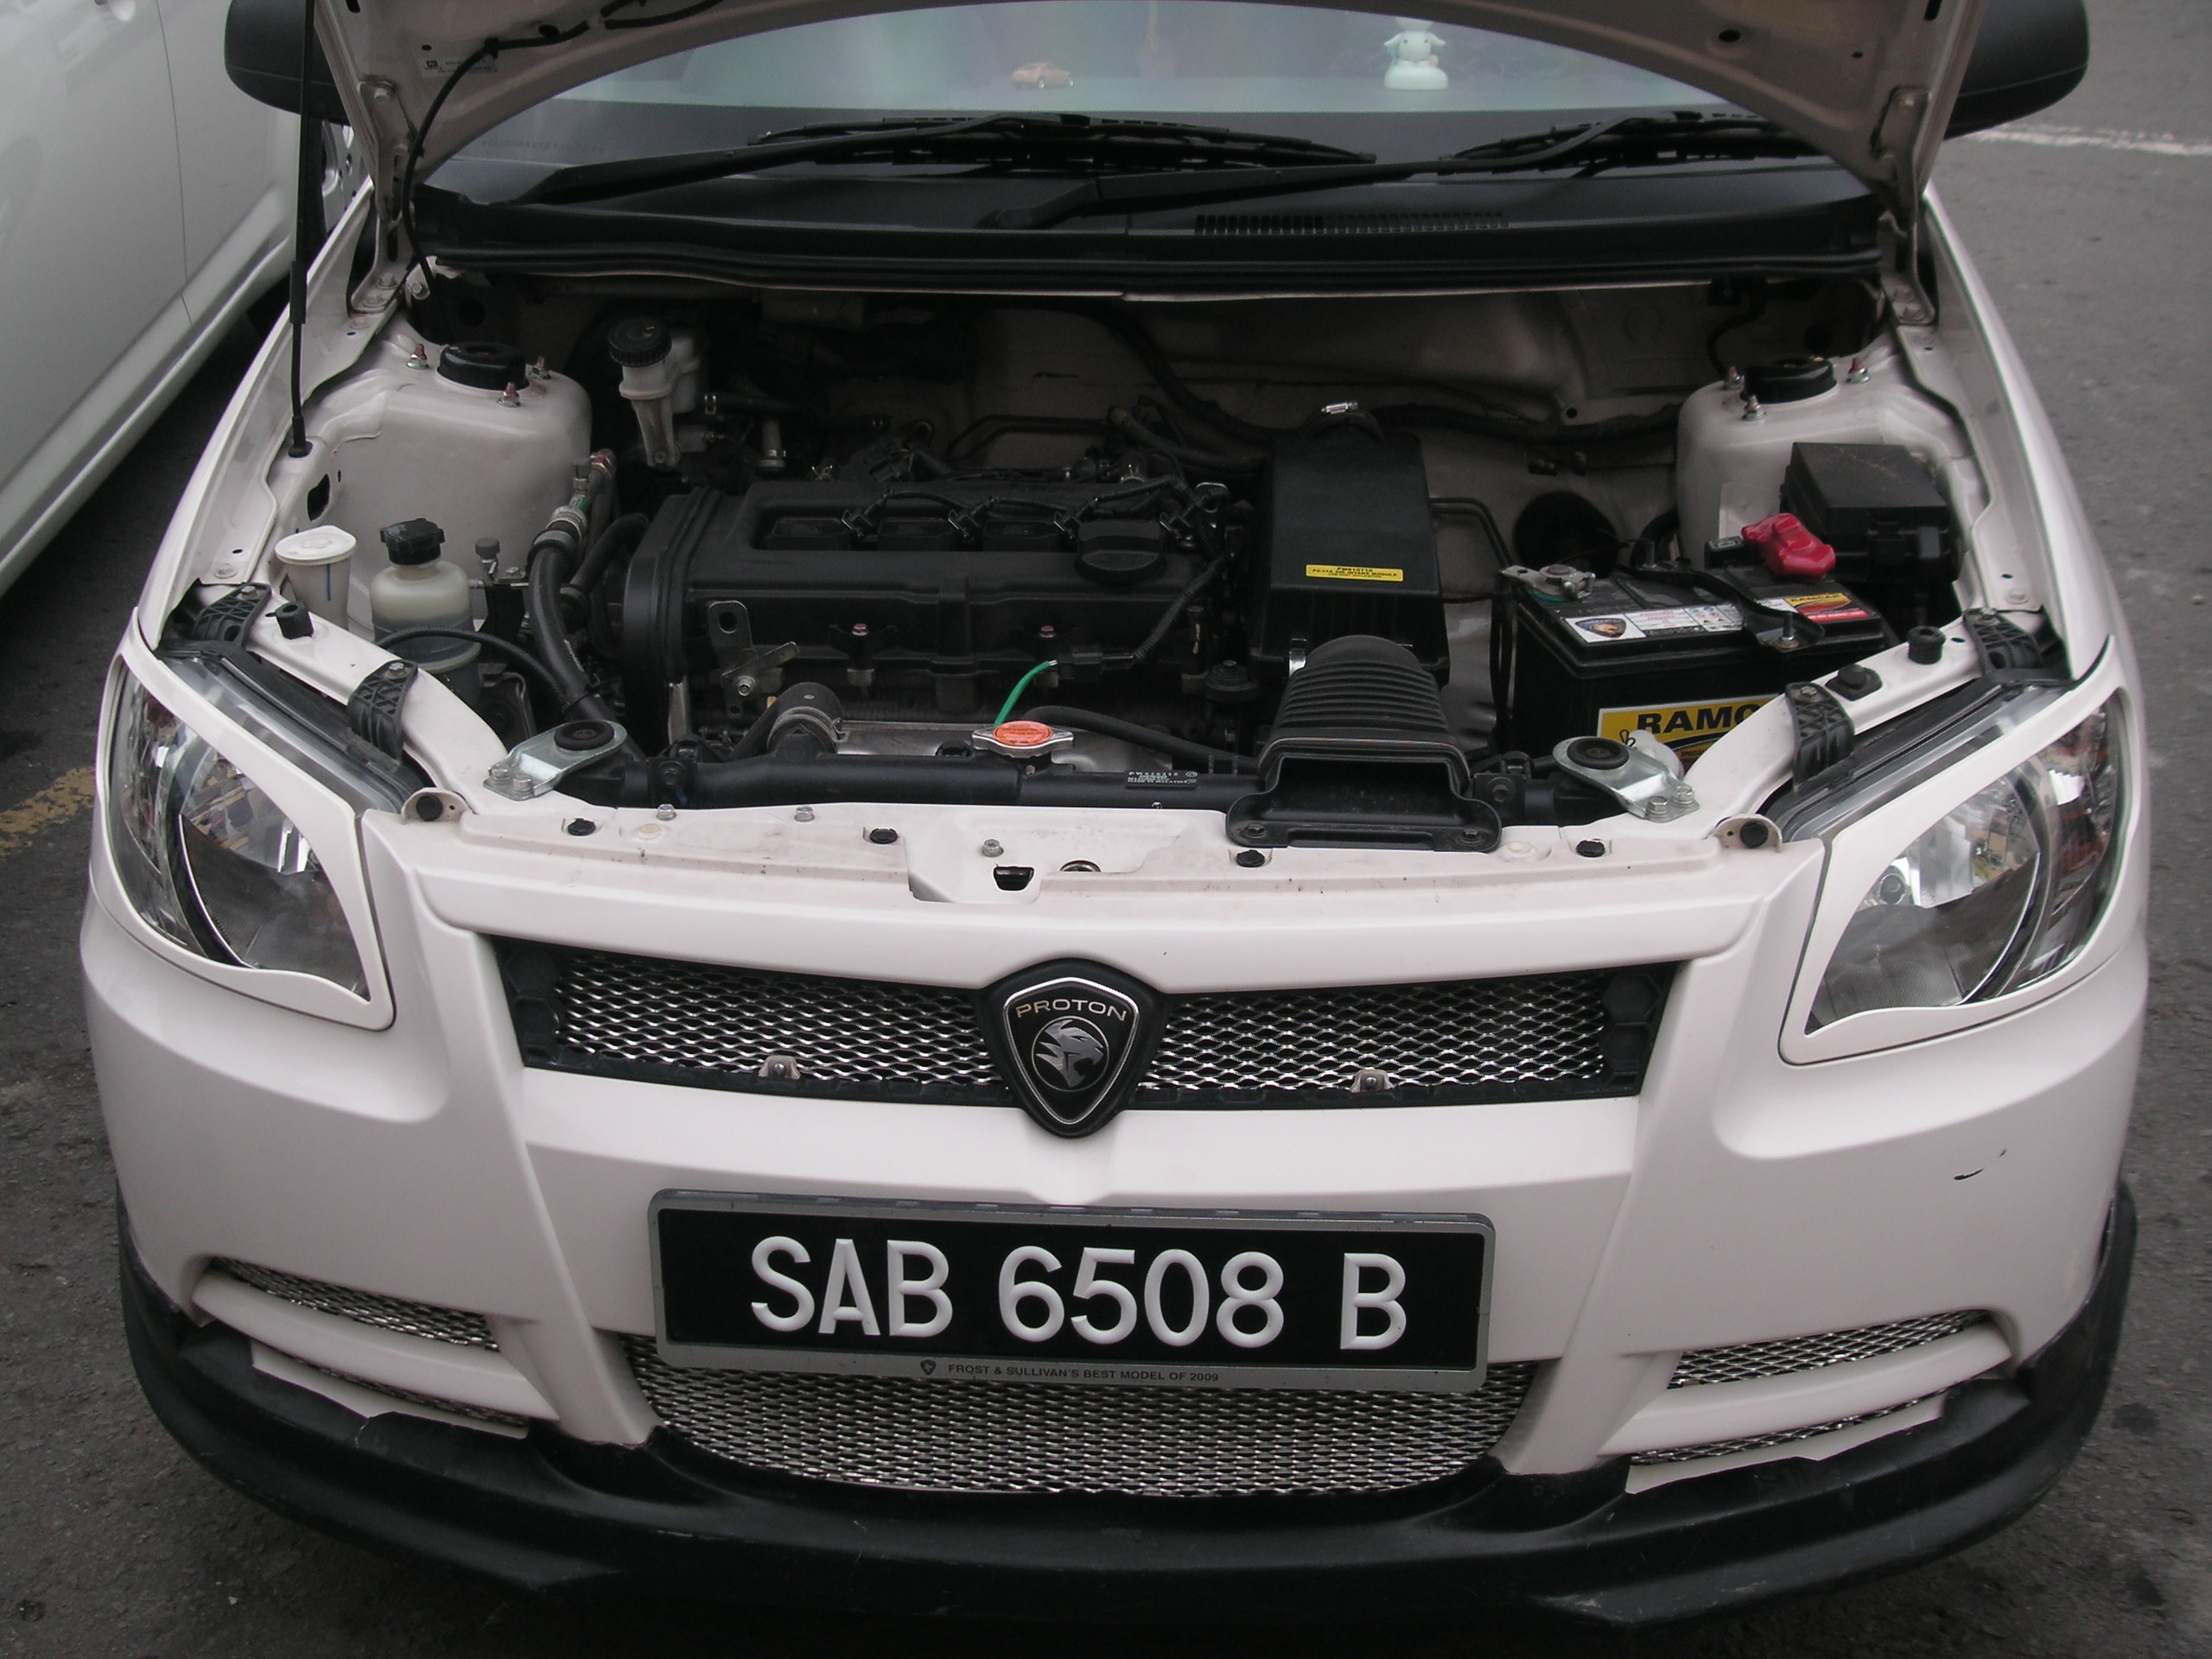 First car to be installed with Surbo, the
Proton Saga BLM